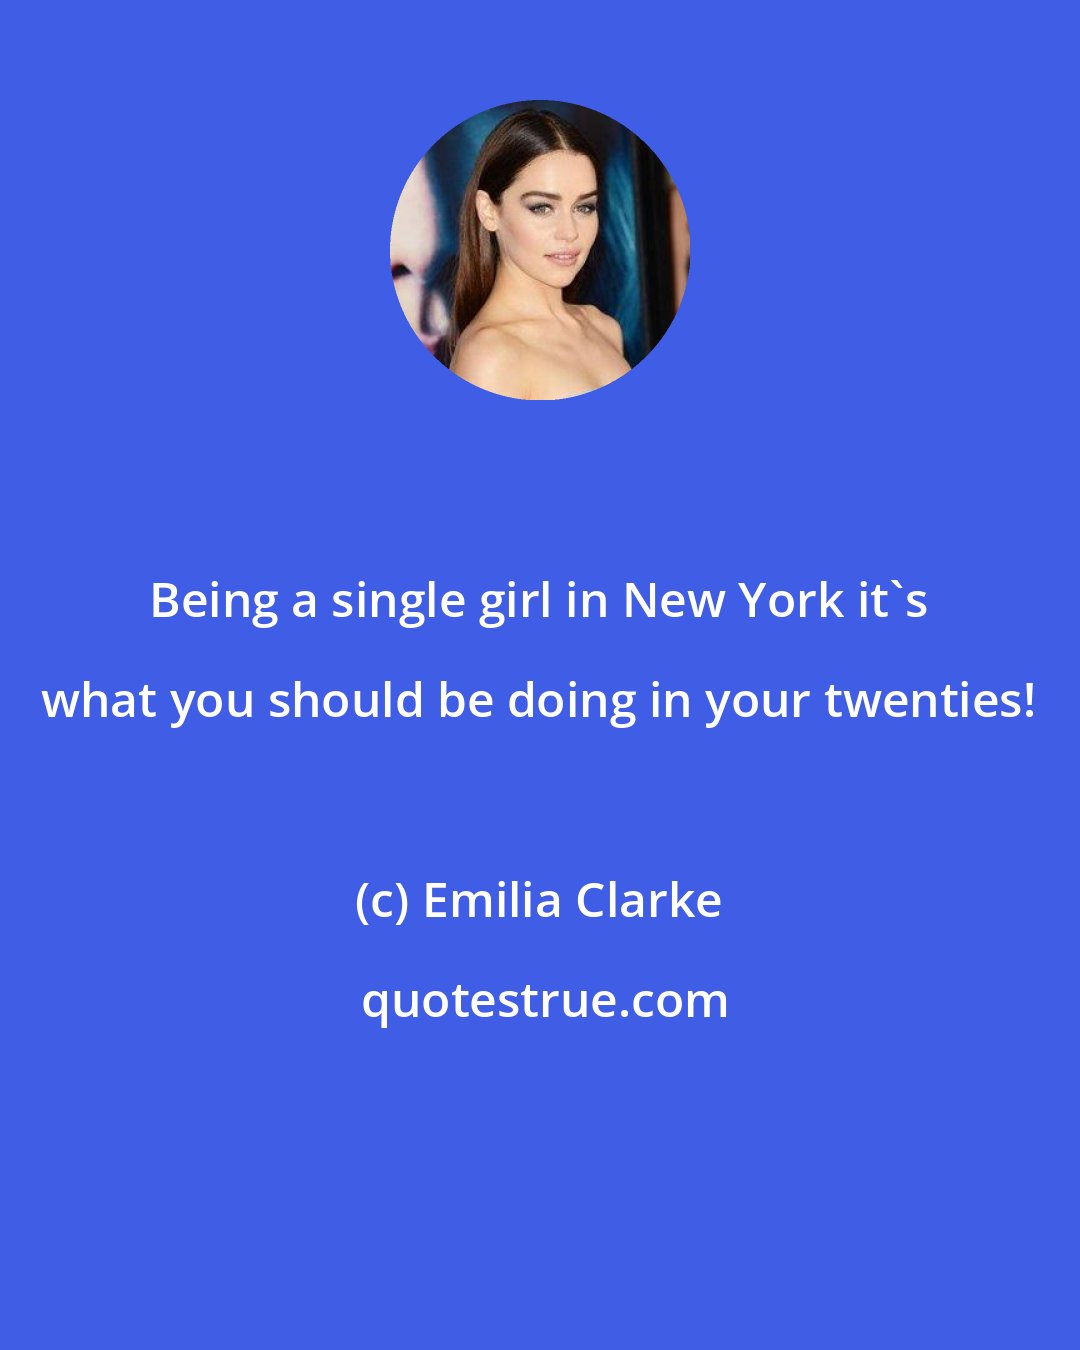 Emilia Clarke: Being a single girl in New York it's what you should be doing in your twenties!